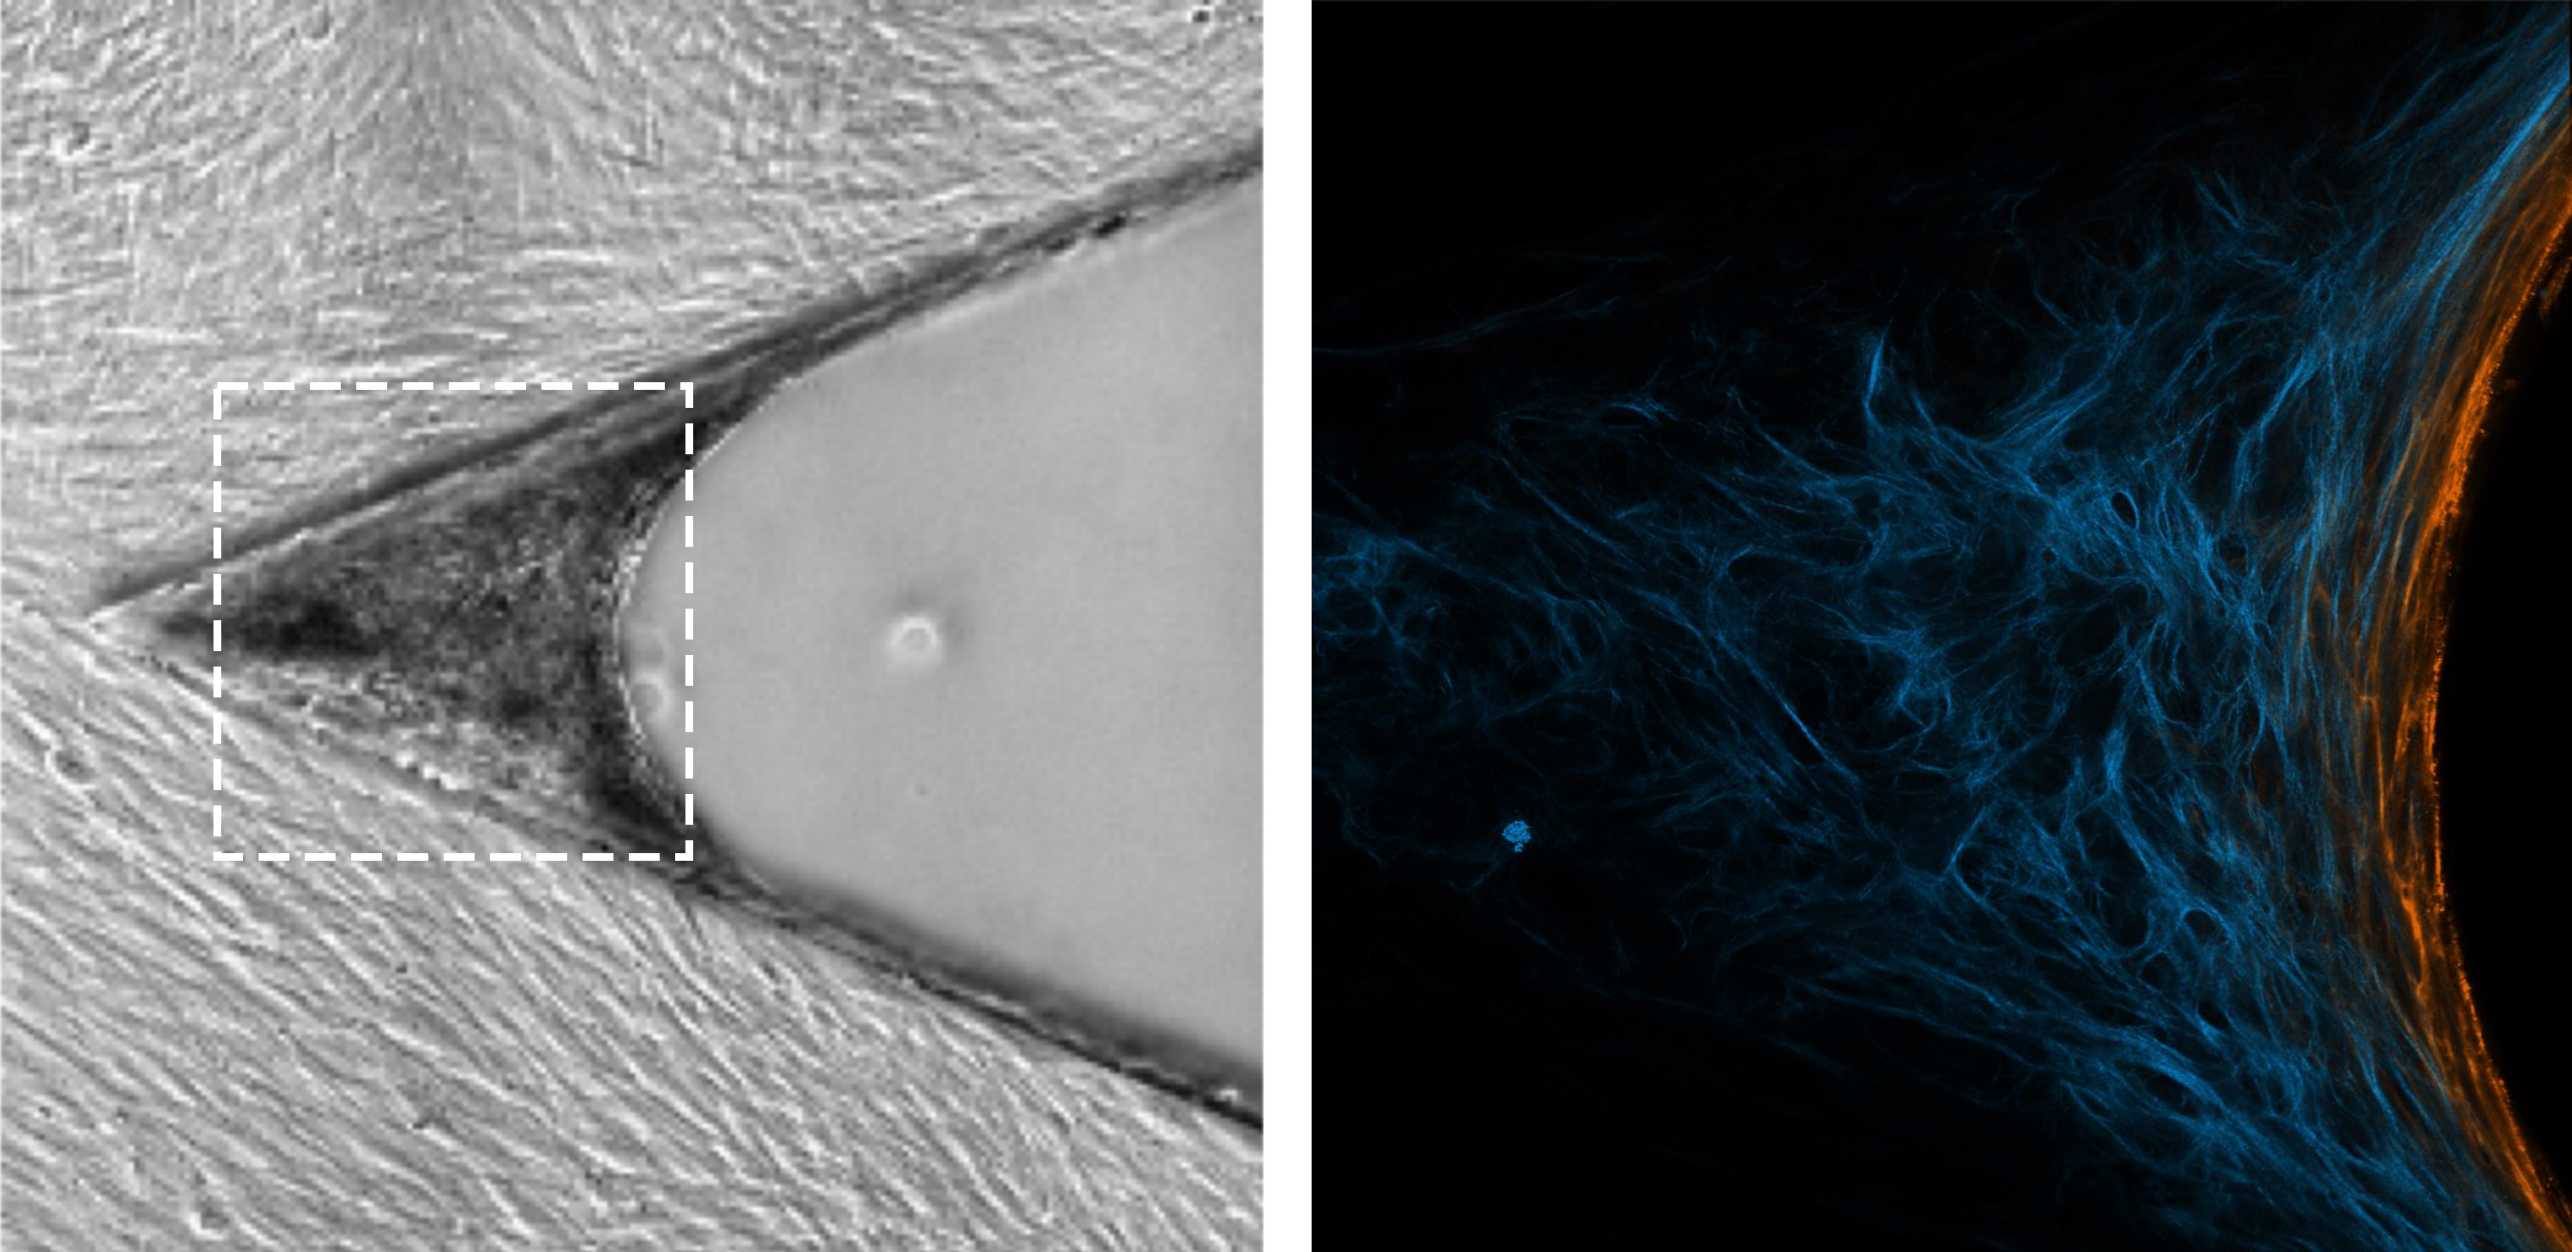 Images of the growth of cells adapted to their environment